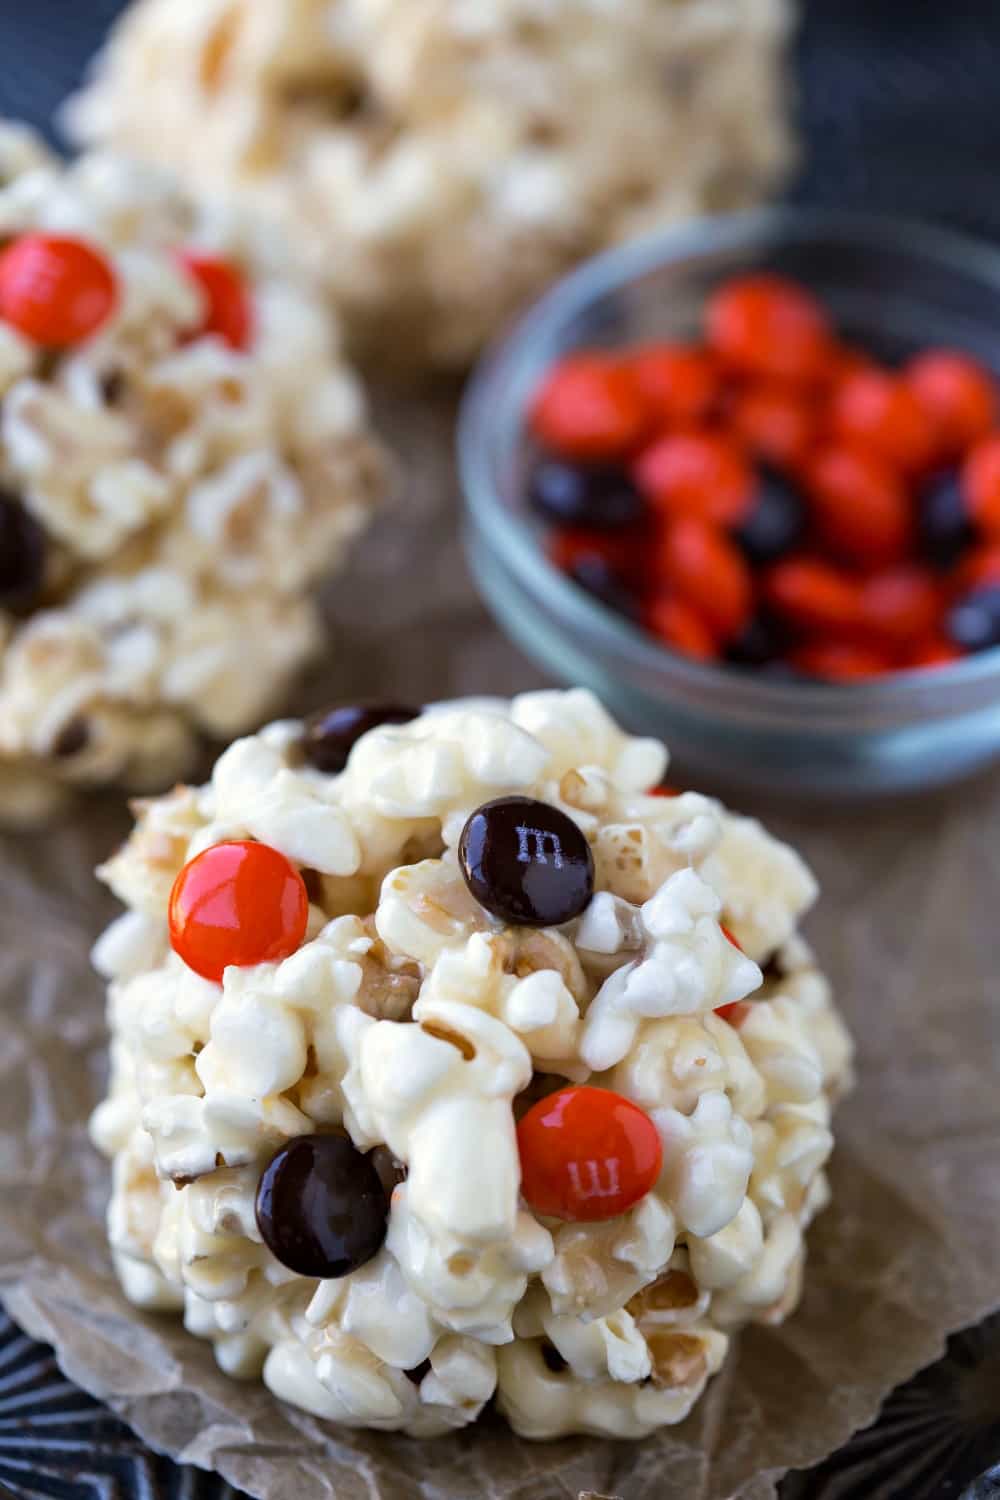 Popcorn balls with M&M's on the outside